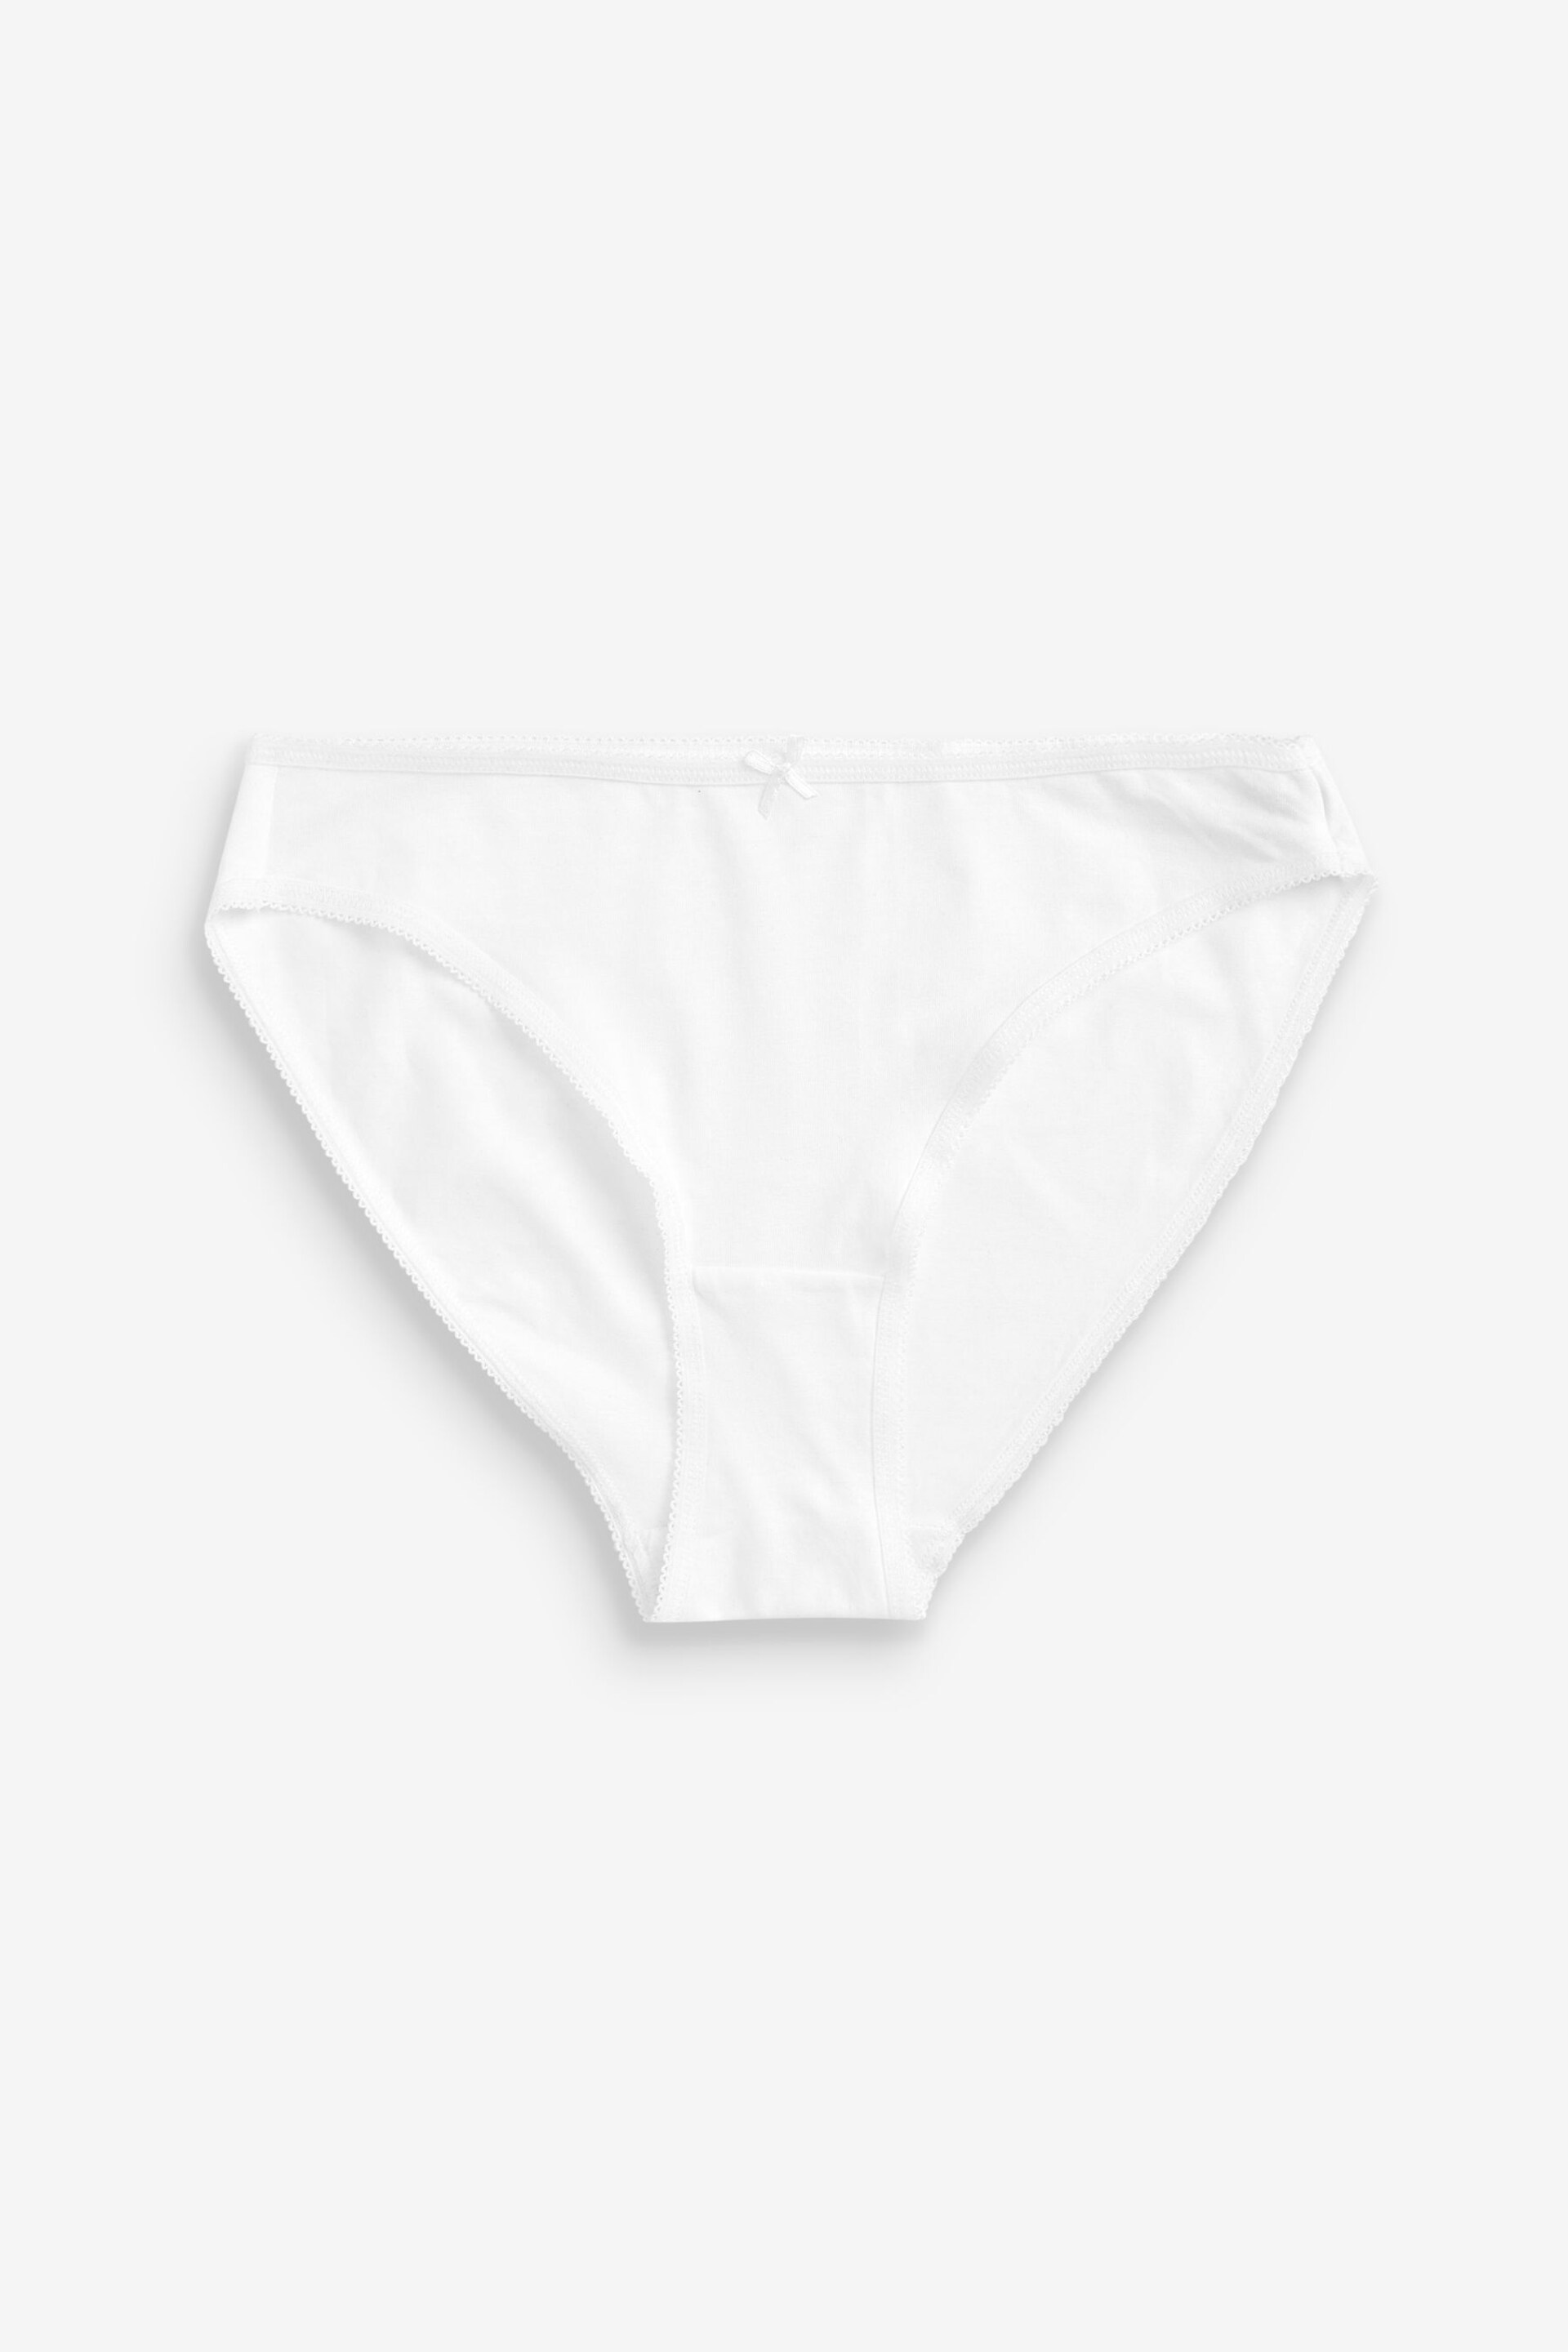 White High Leg Cotton Rich Knickers 4 Pack - Image 5 of 5